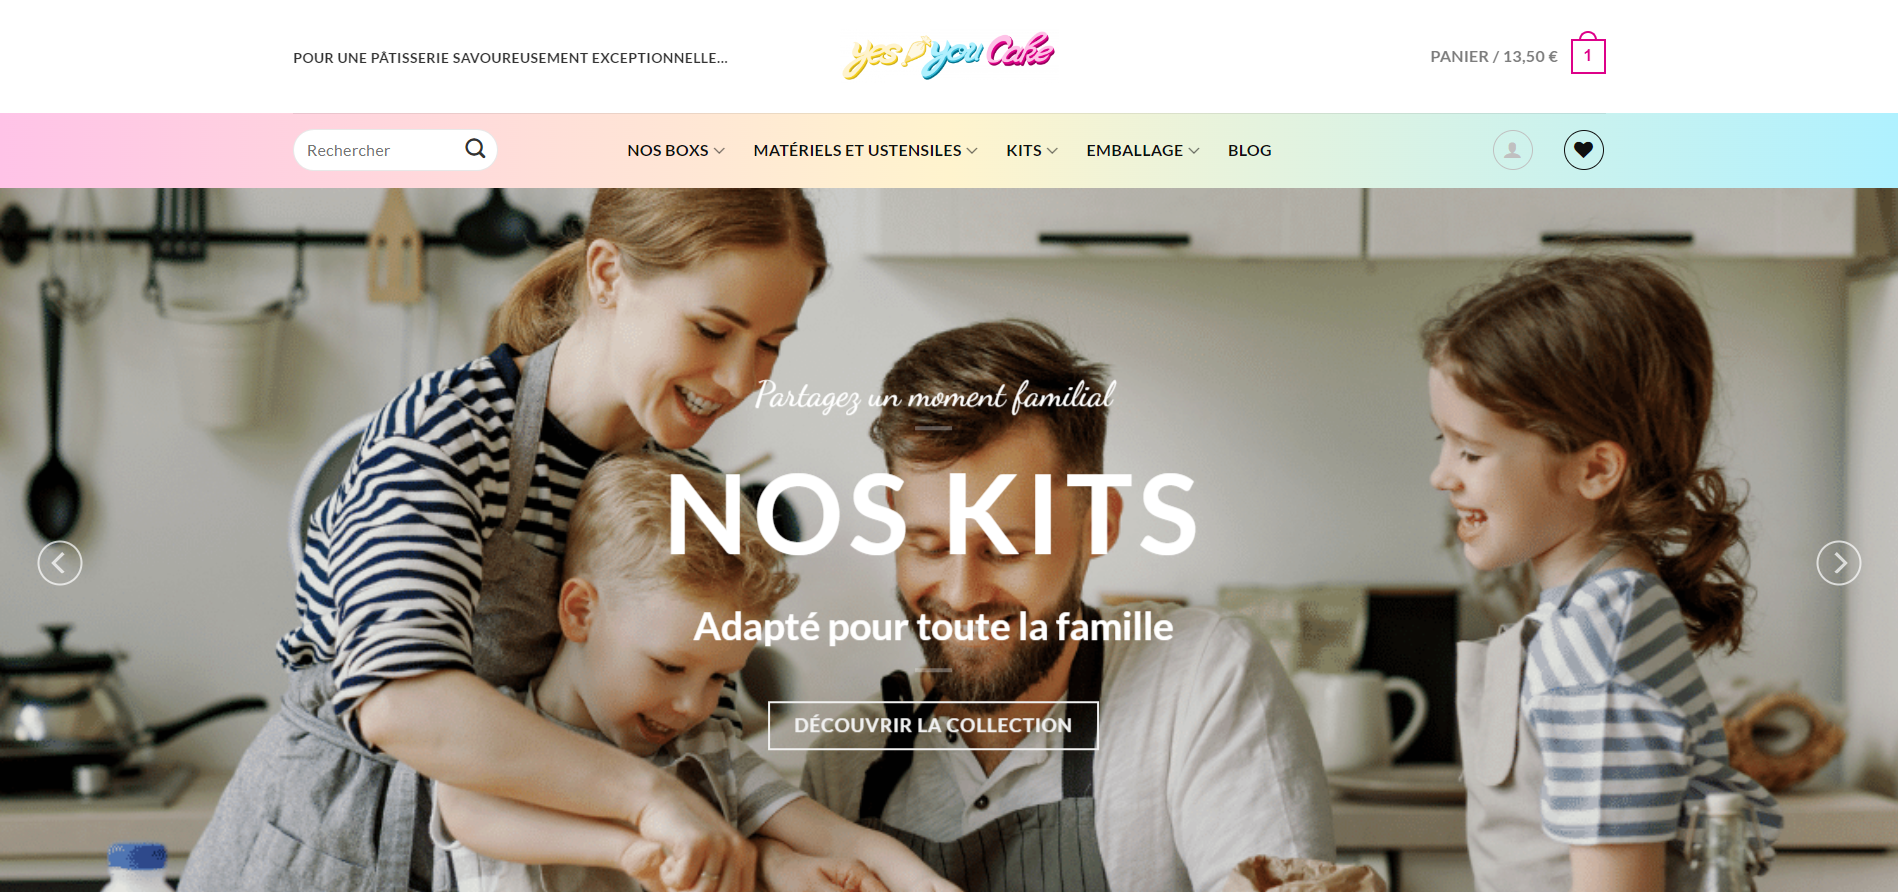 Yes You Cake e-commerce patisserie